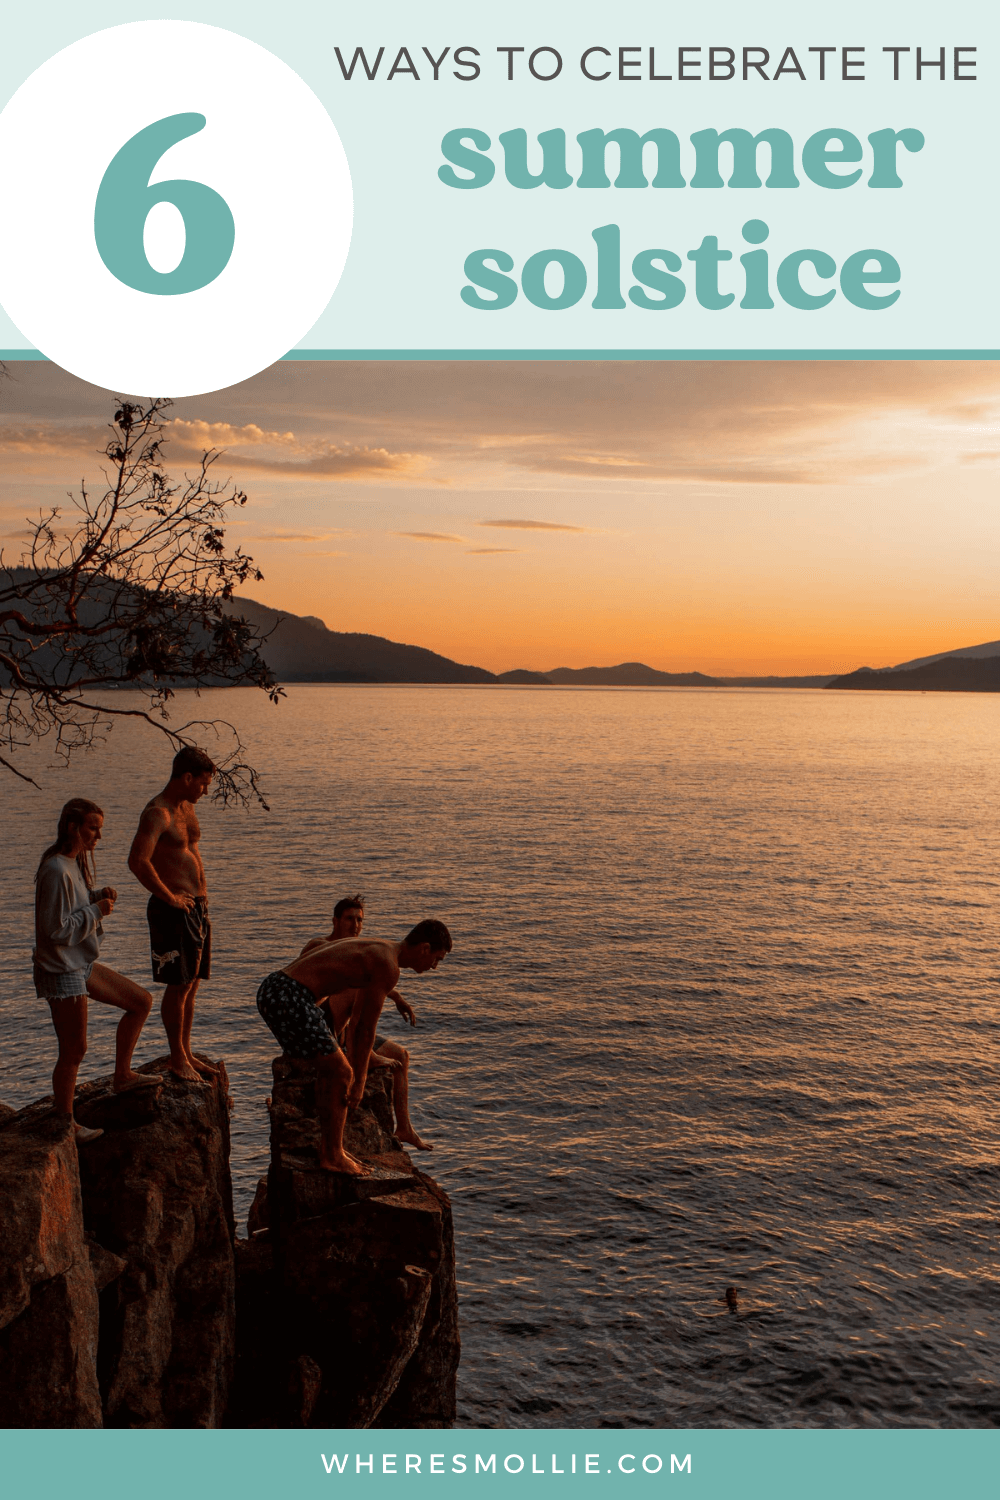 How to celebrate the summer solstice